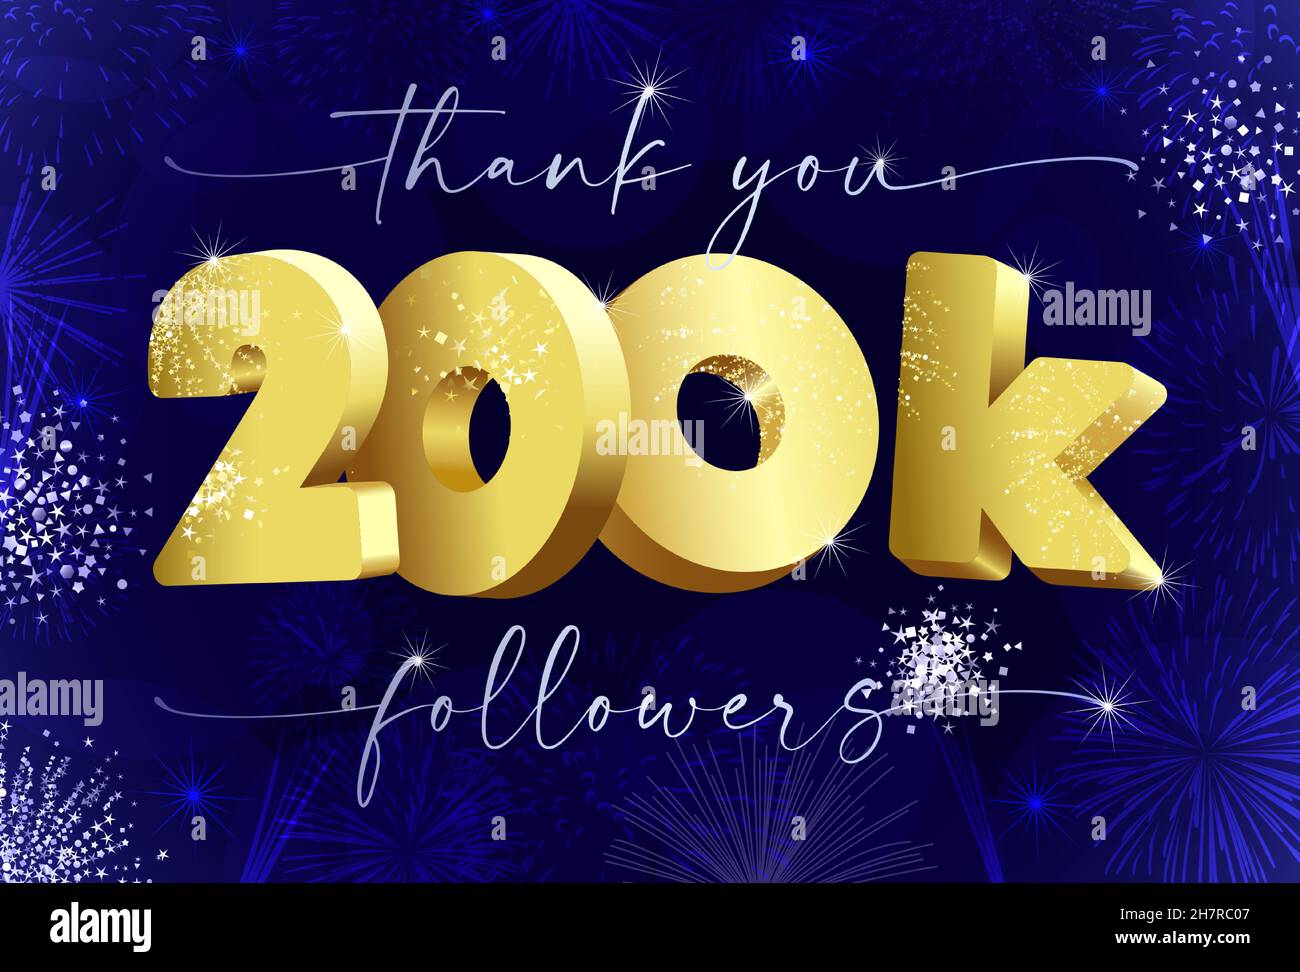 Thank you 200 000 followers creative concept. Bright festive thanks for 200.000 networking likes. 200k subscribers shining golden web sign. 3D luxury Stock Vector